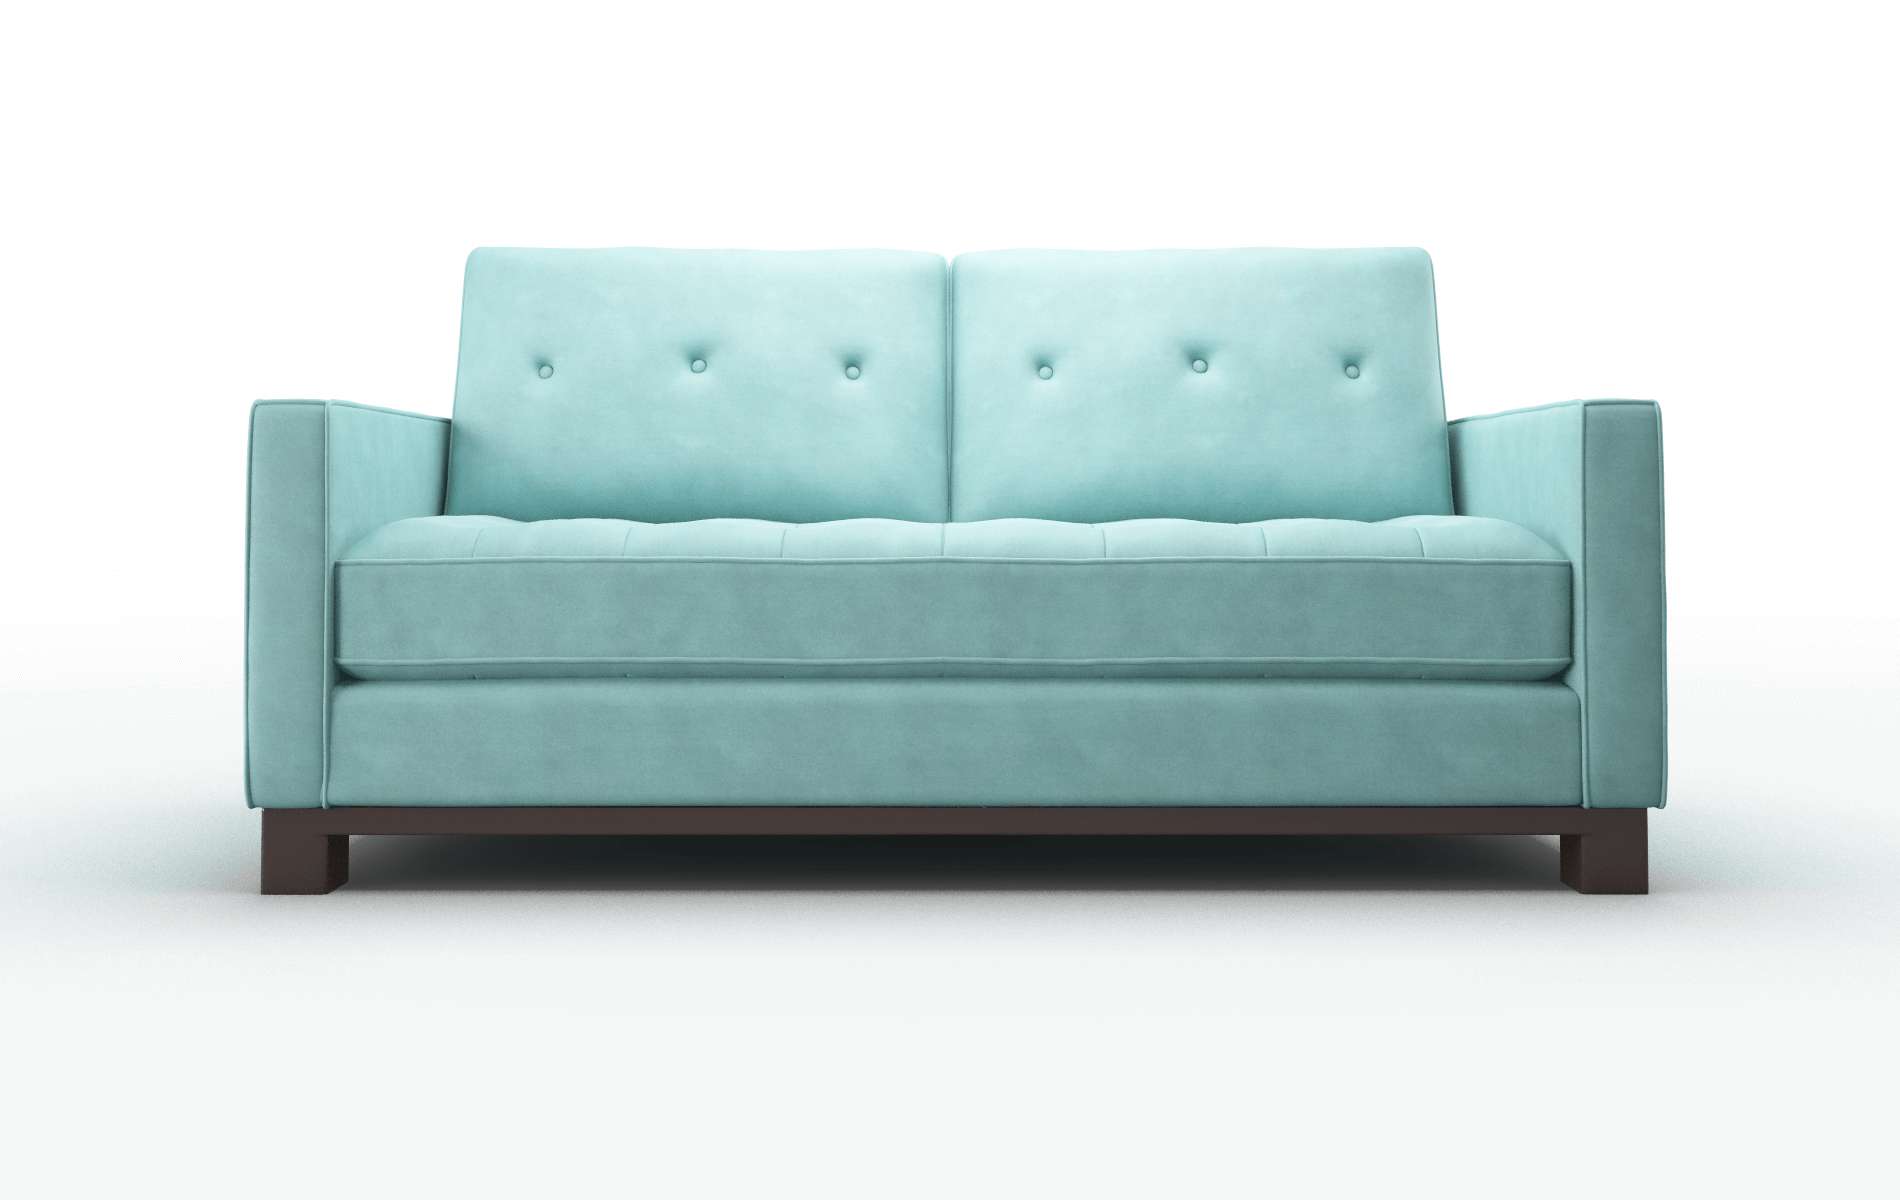 Syros Curious Turquoise chair espresso legs